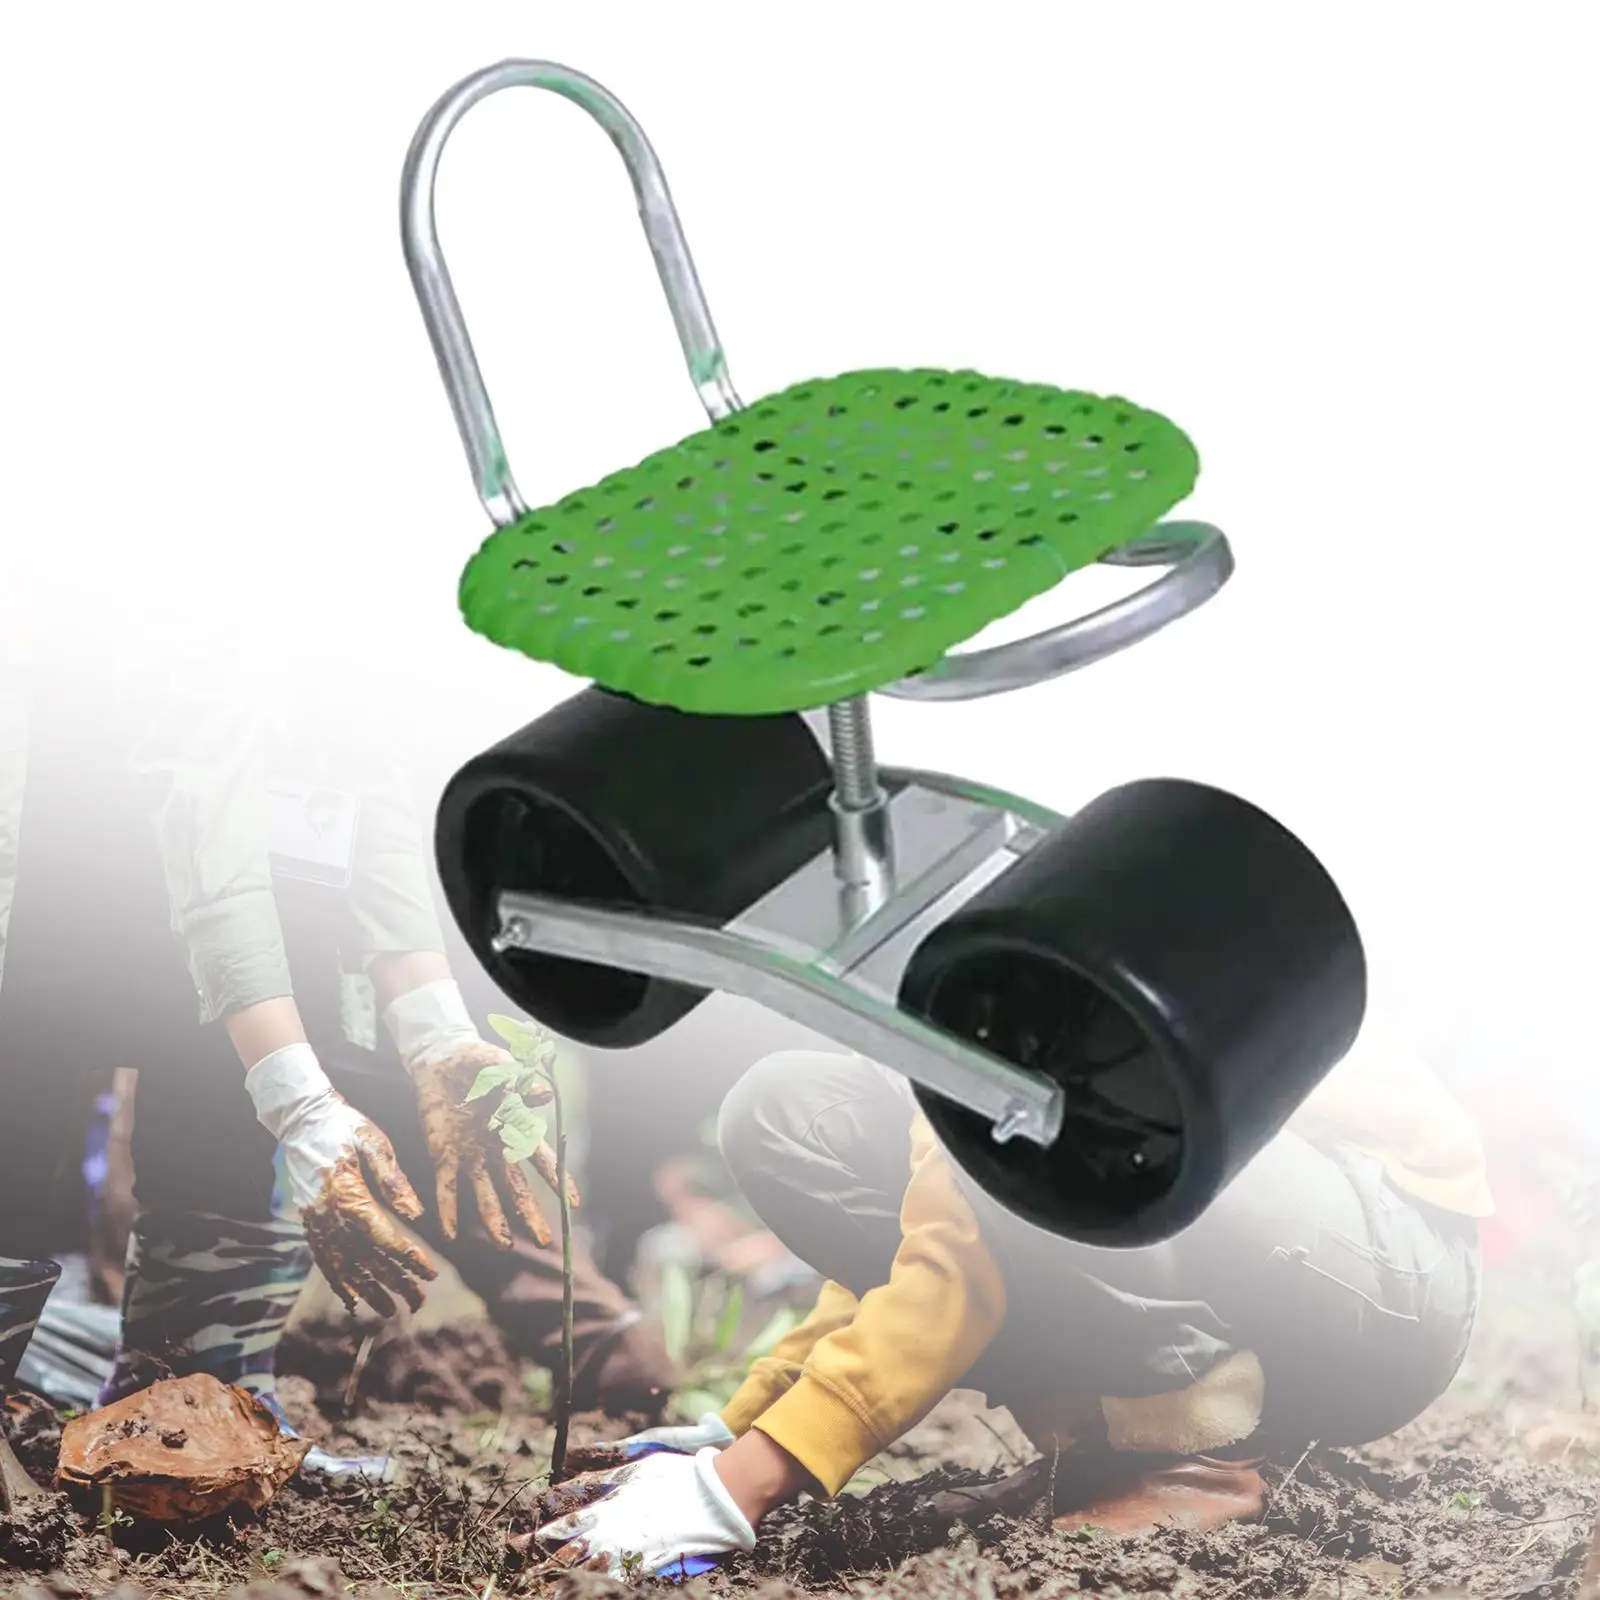 Outdoor Cart Height Adjustable 360 Degree Swivel Seat Rolling Seat Lawn Wagon Cart for Weeding Planting Garden Easy to Move